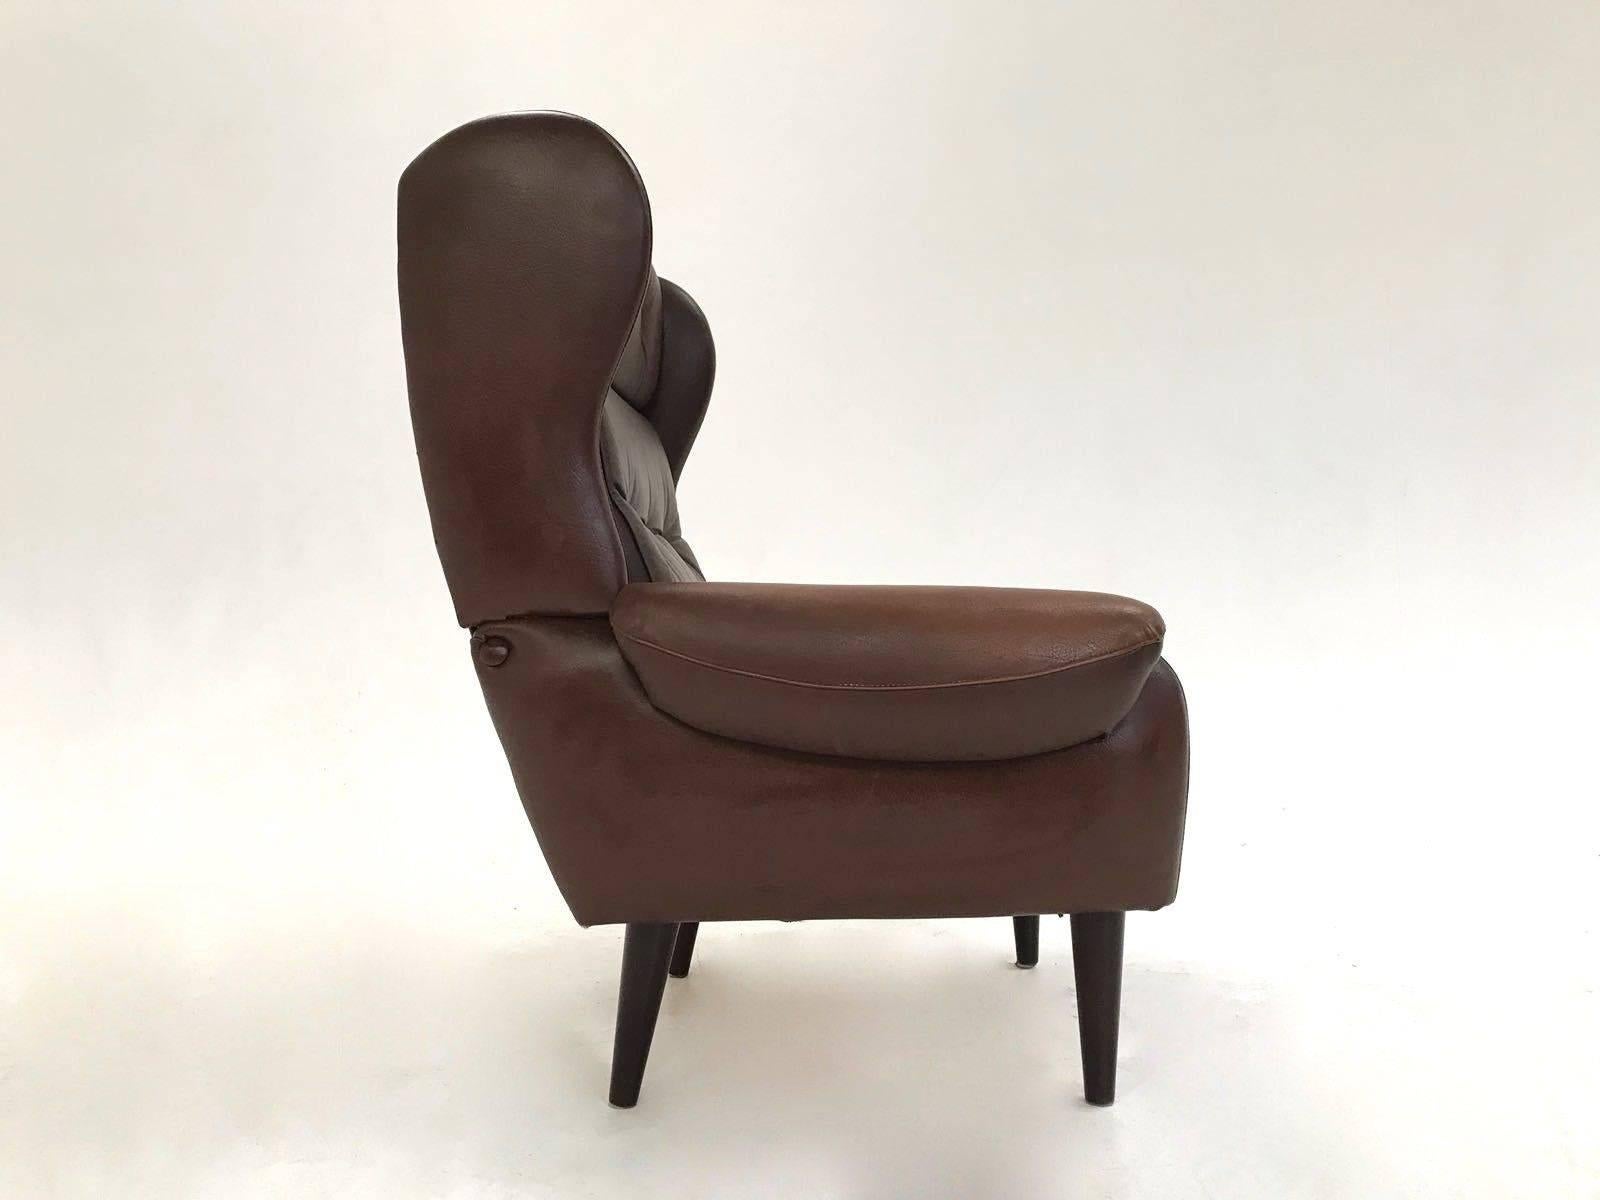 20th Century Danish Brown Leather High Back Armchair Midcentury Chair, 1970s For Sale